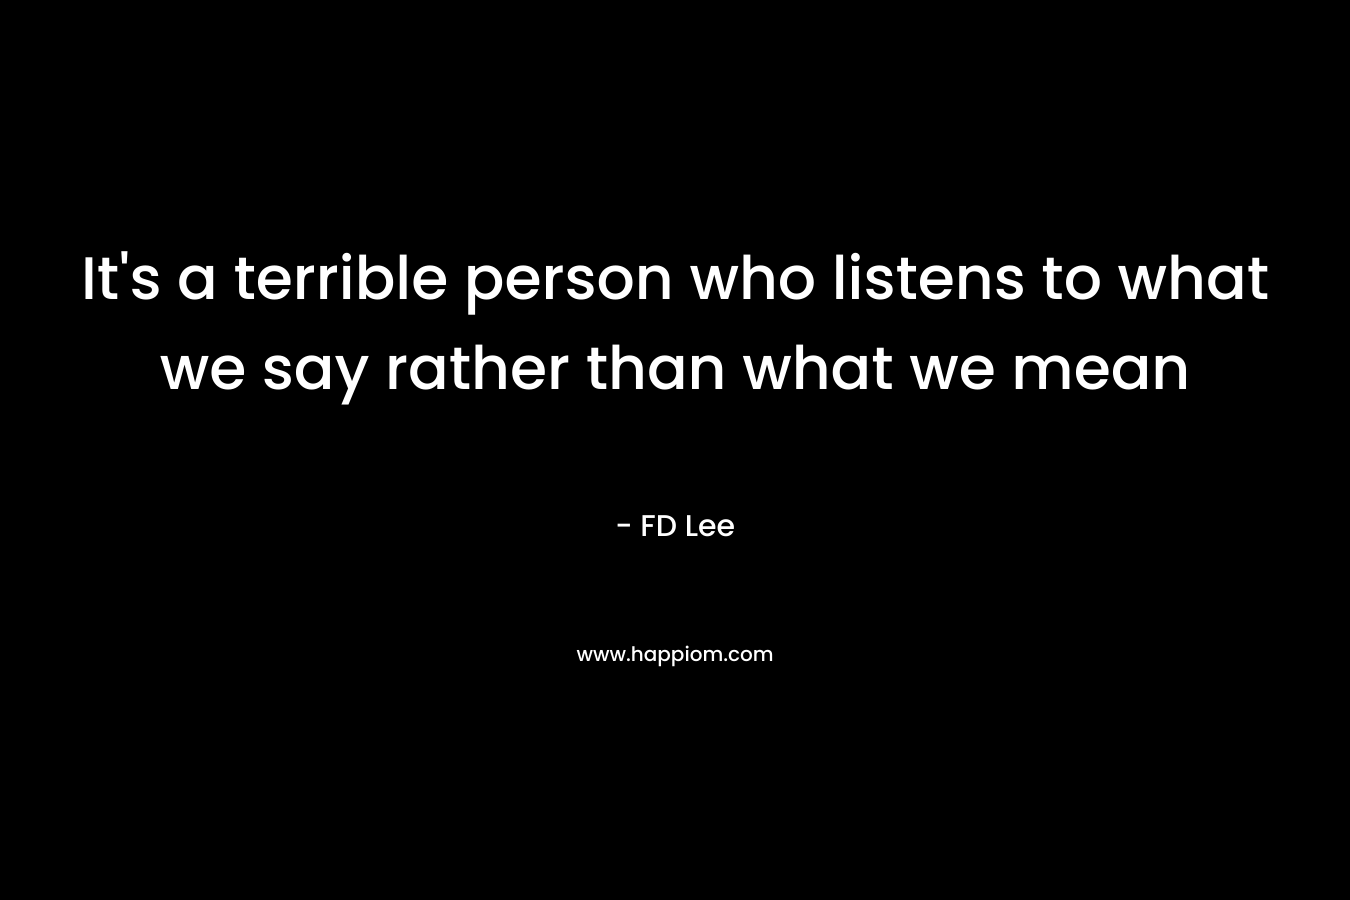 It's a terrible person who listens to what we say rather than what we mean